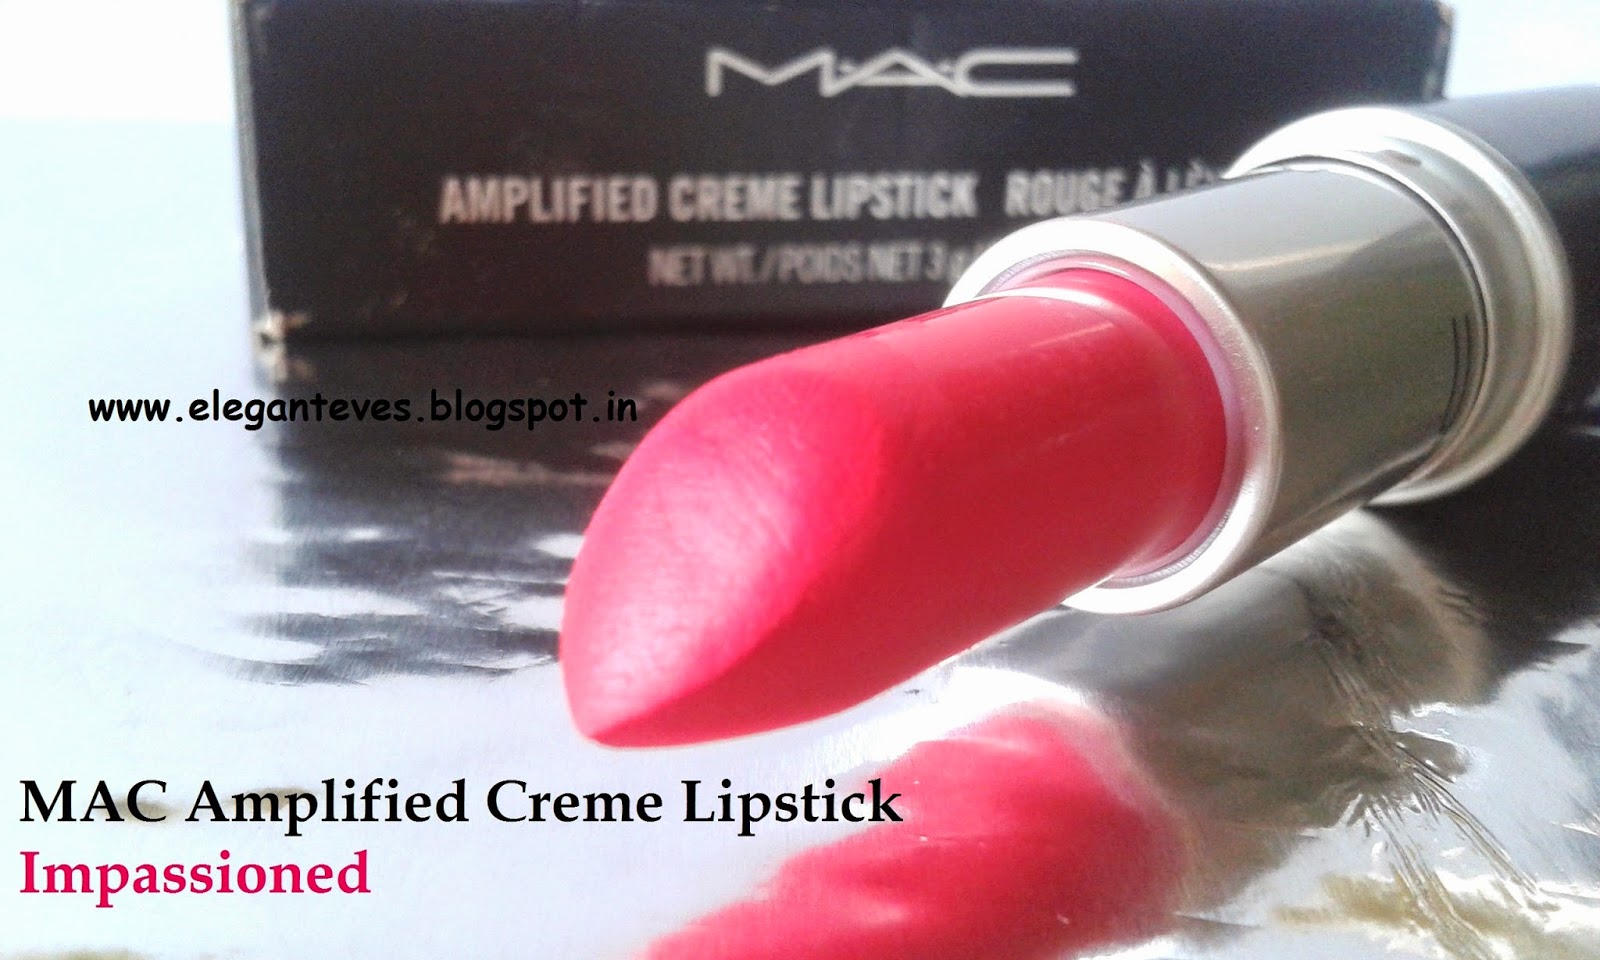 Review Swatches Lotd Of Mac Amplified Creme Lipstick Impassioned Elegant Eves